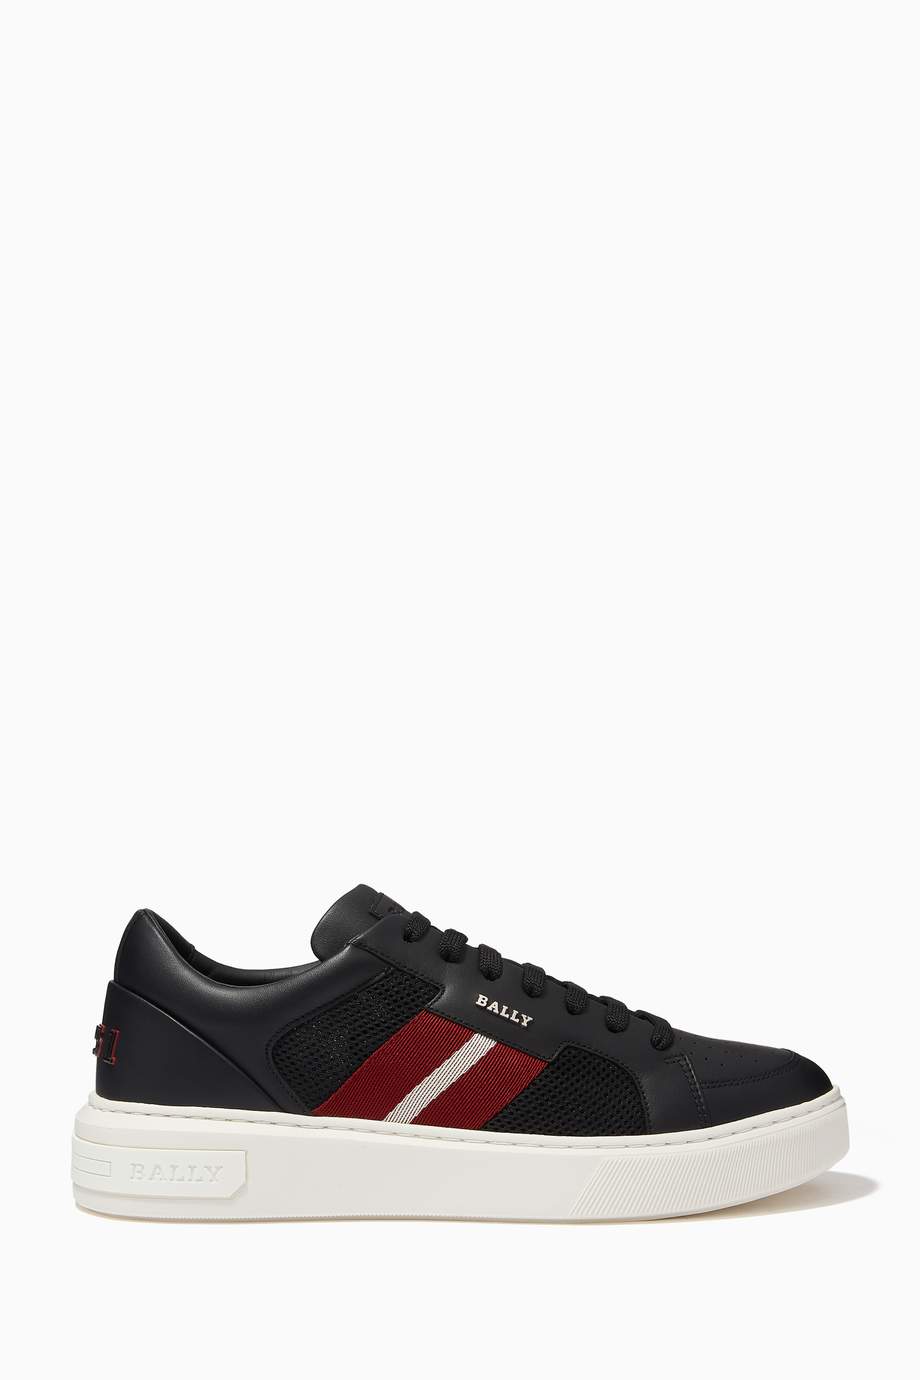 Shop Bally Black Melys Sneakers in Leather & Mesh for Men | Ounass UAE